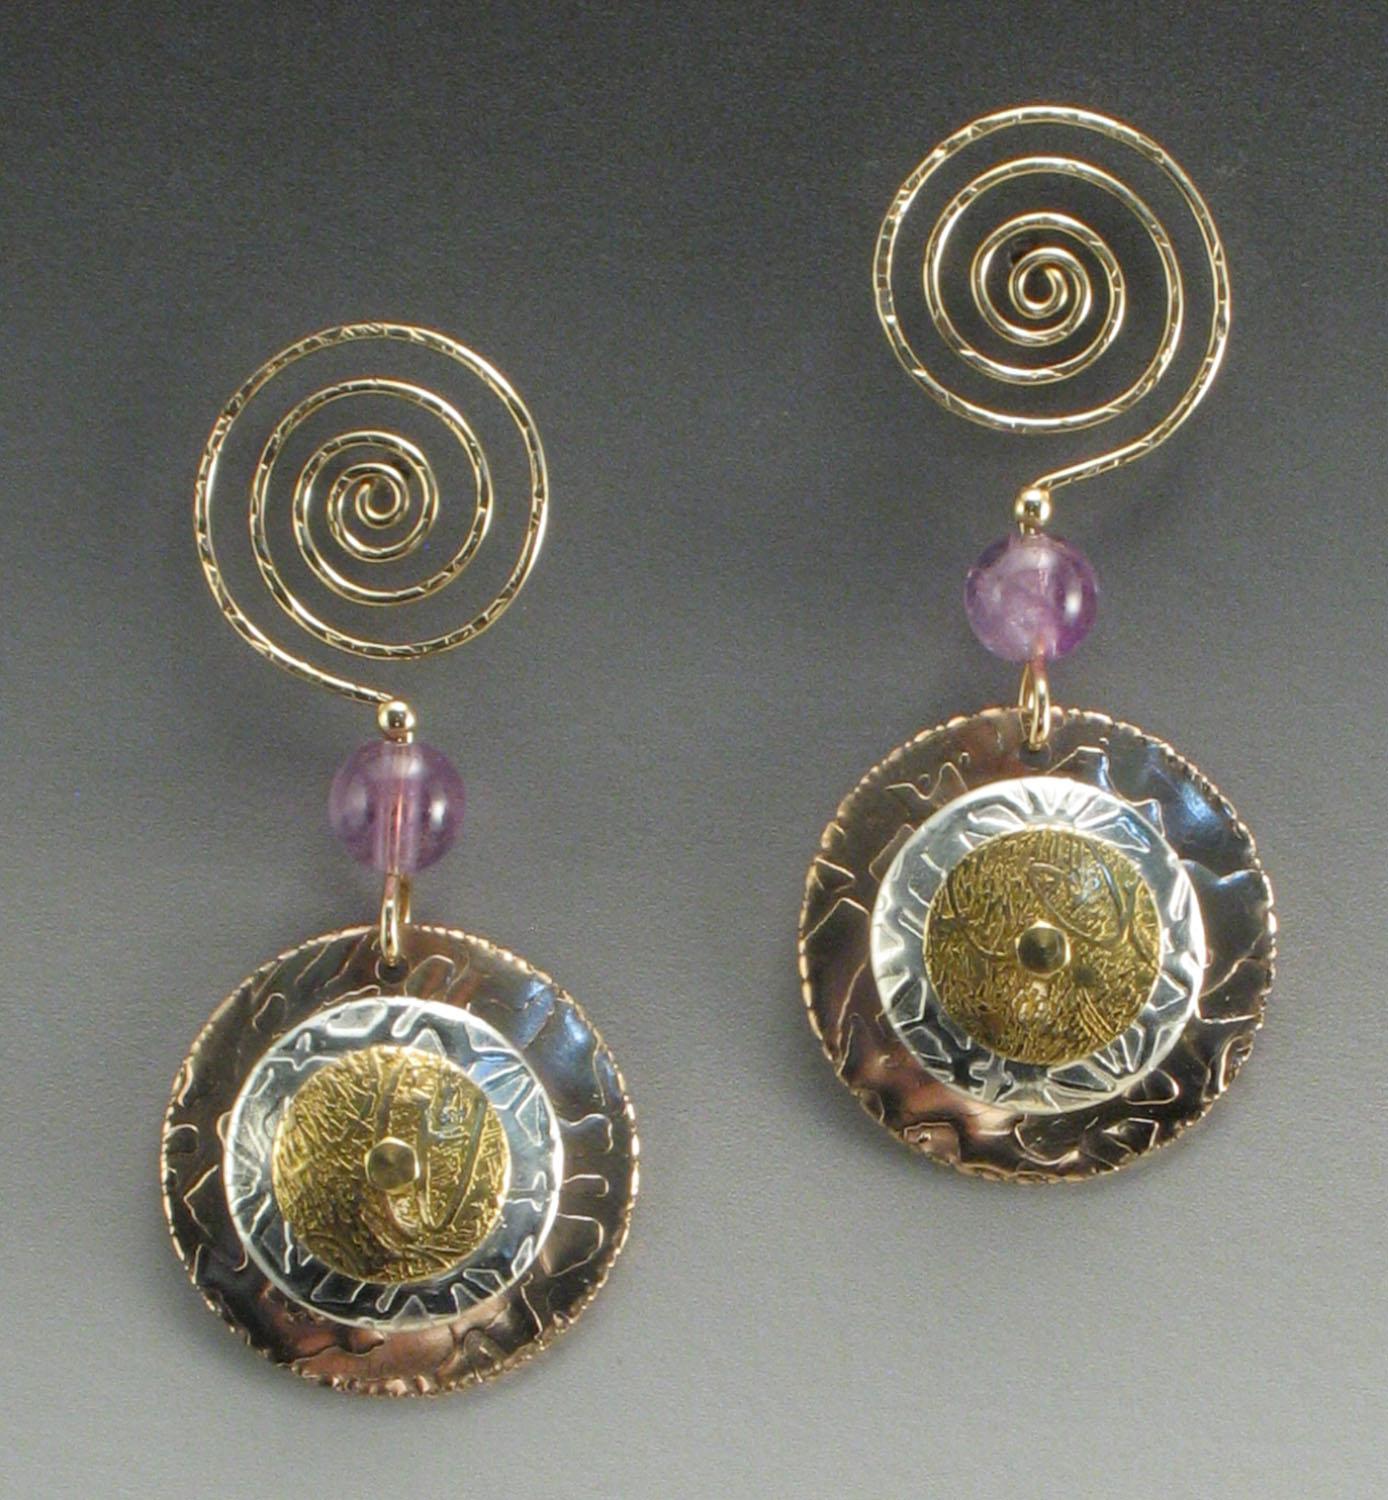 Mixed Metal Earrings with Amethyst